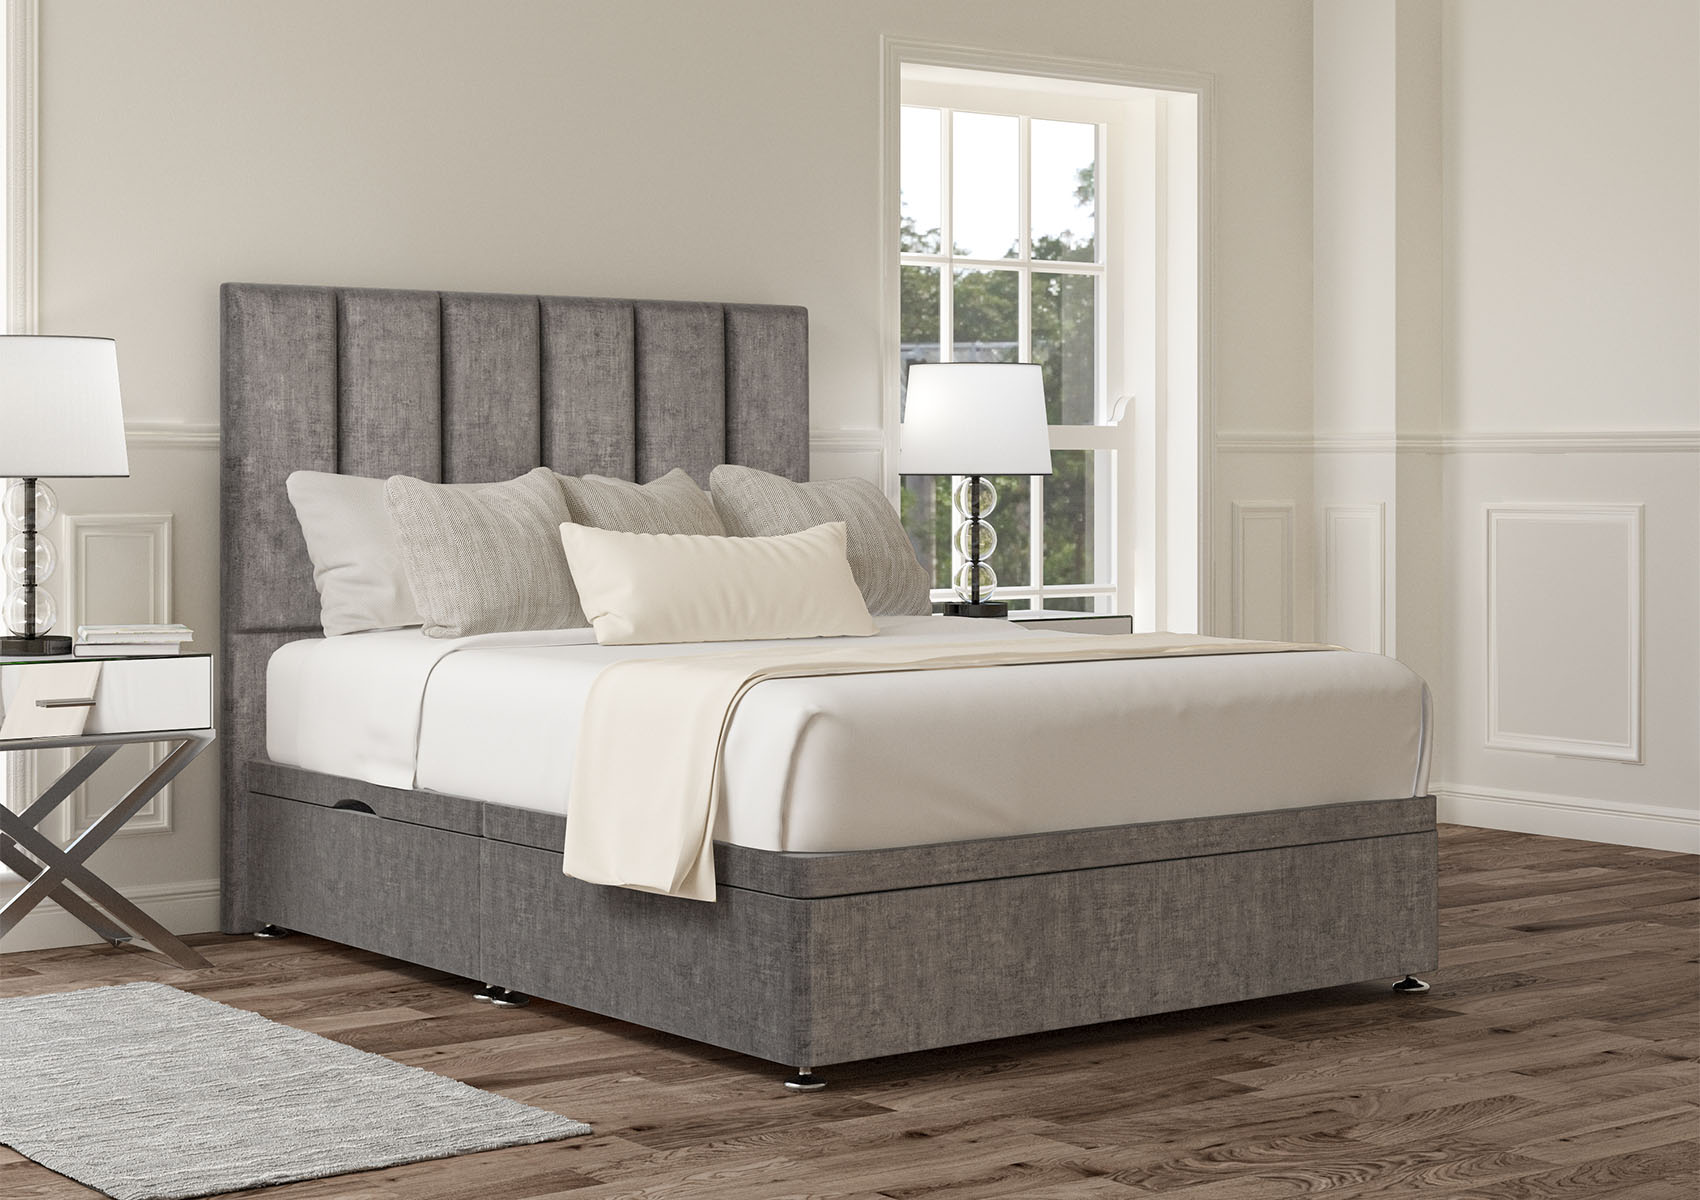 View Empire Heritage Royal Upholstered Single Ottoman Bed Time4Sleep information